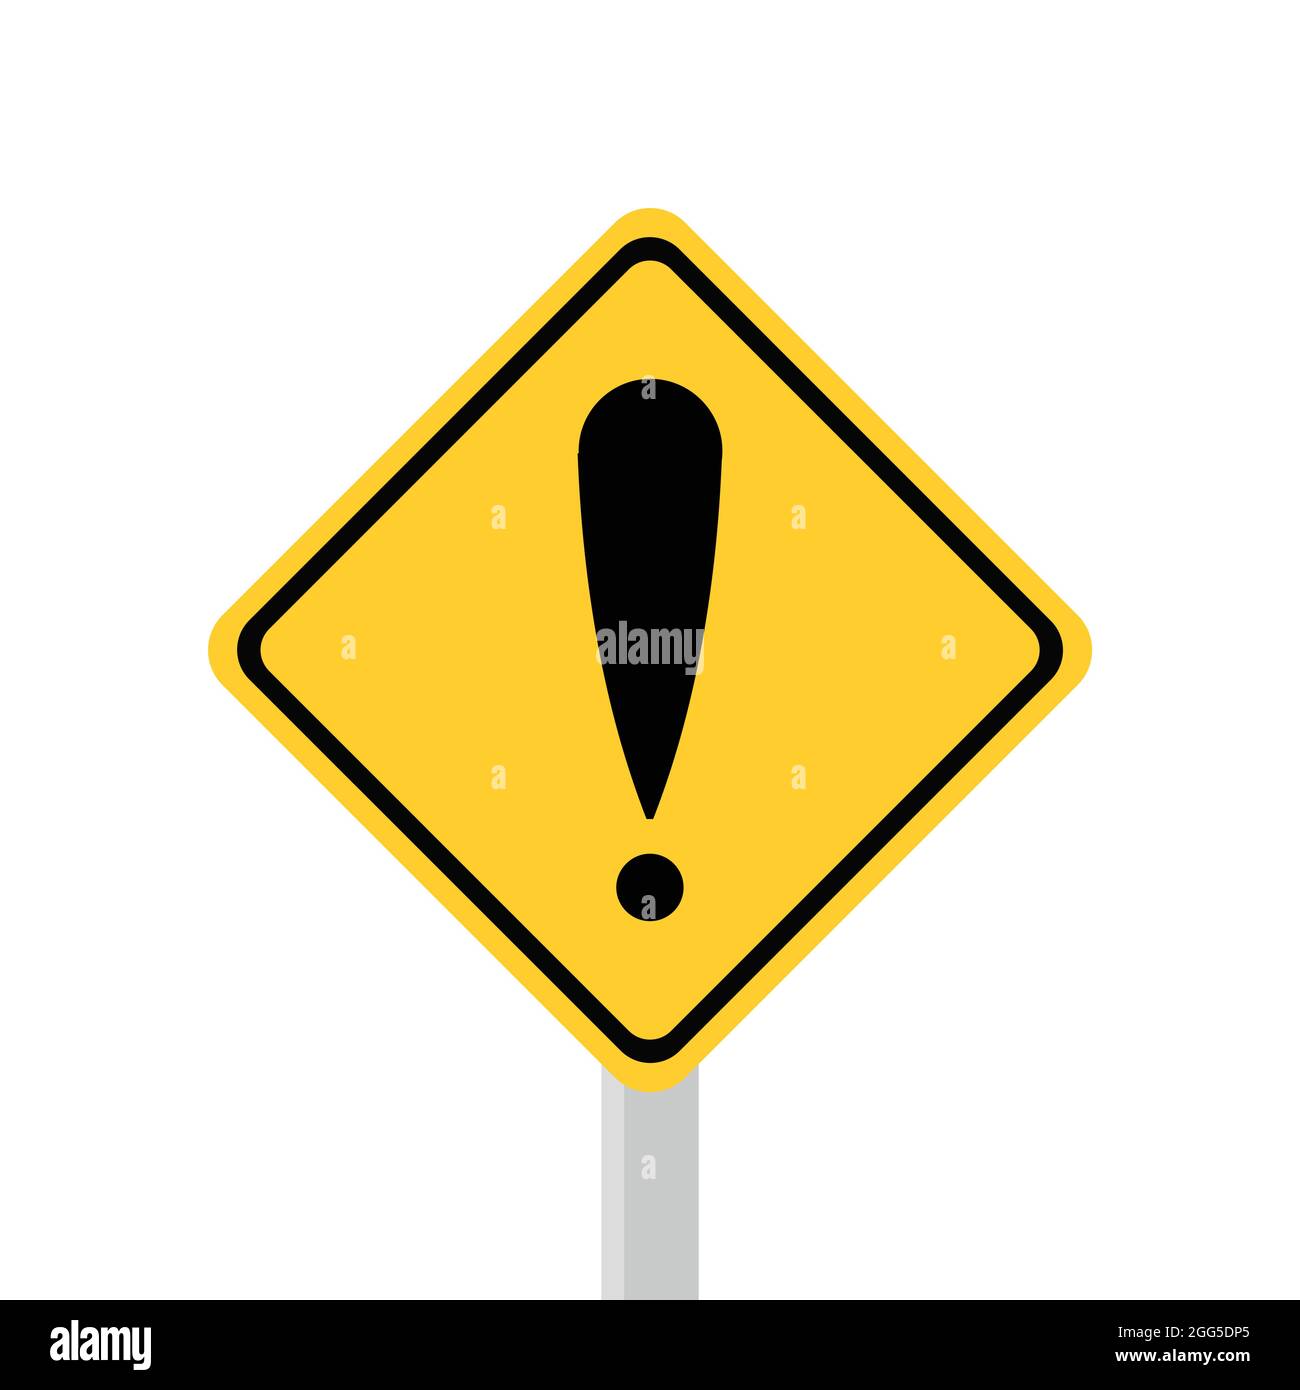 Warning signs. Traffic safety signs are orange. warning silhouette Stock Vector